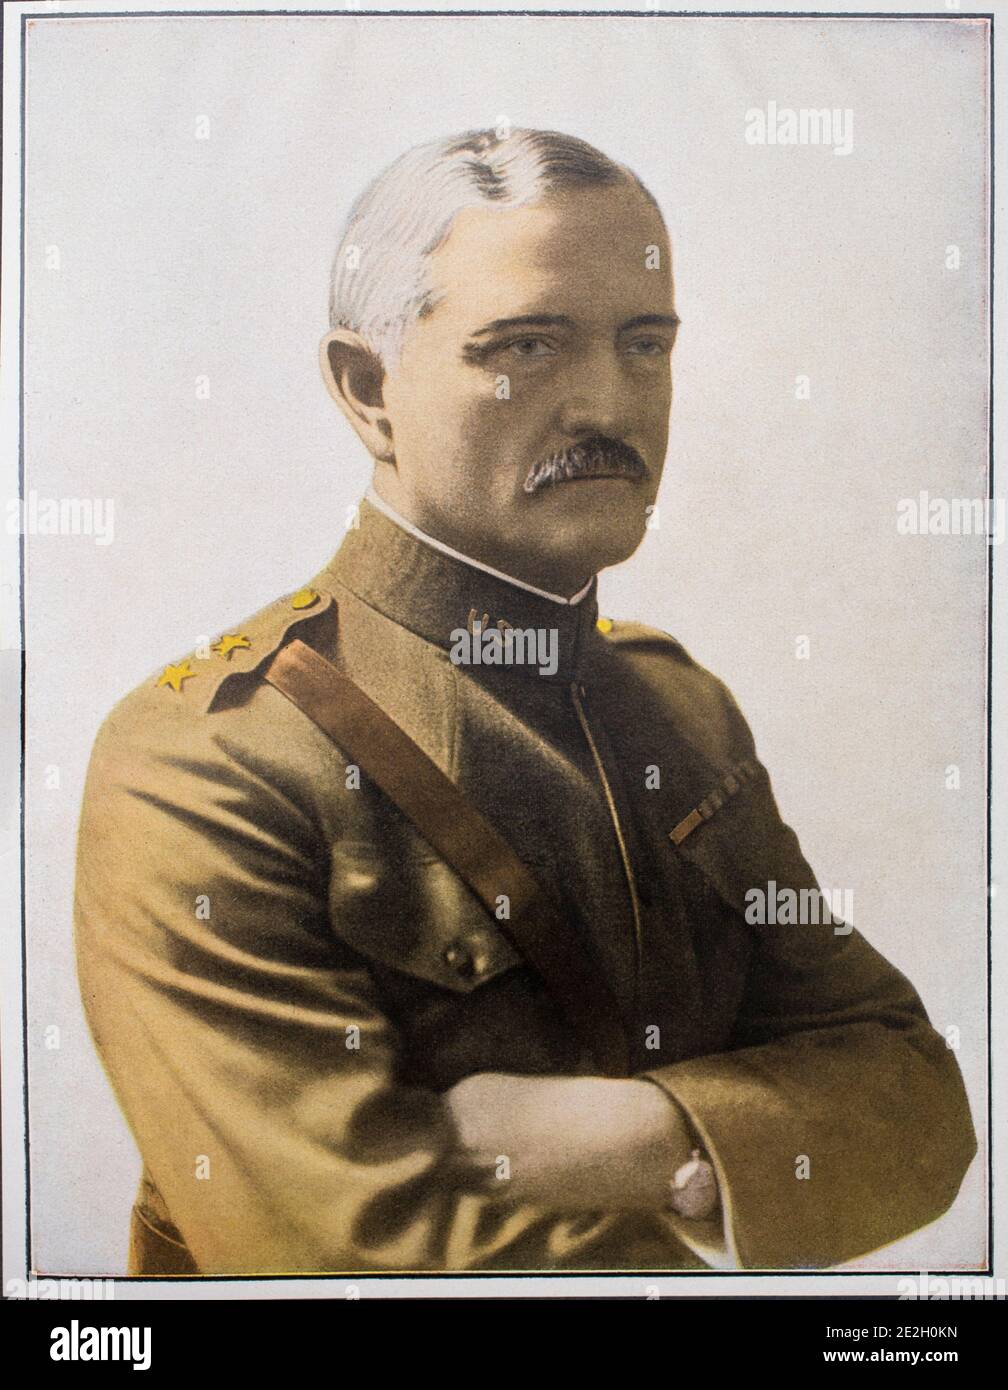 General of the Armies John Joseph 'Black Jack' Pershing (1860 – 1948) was a senior United States Army officer. His most famous post was when he served Stock Photo